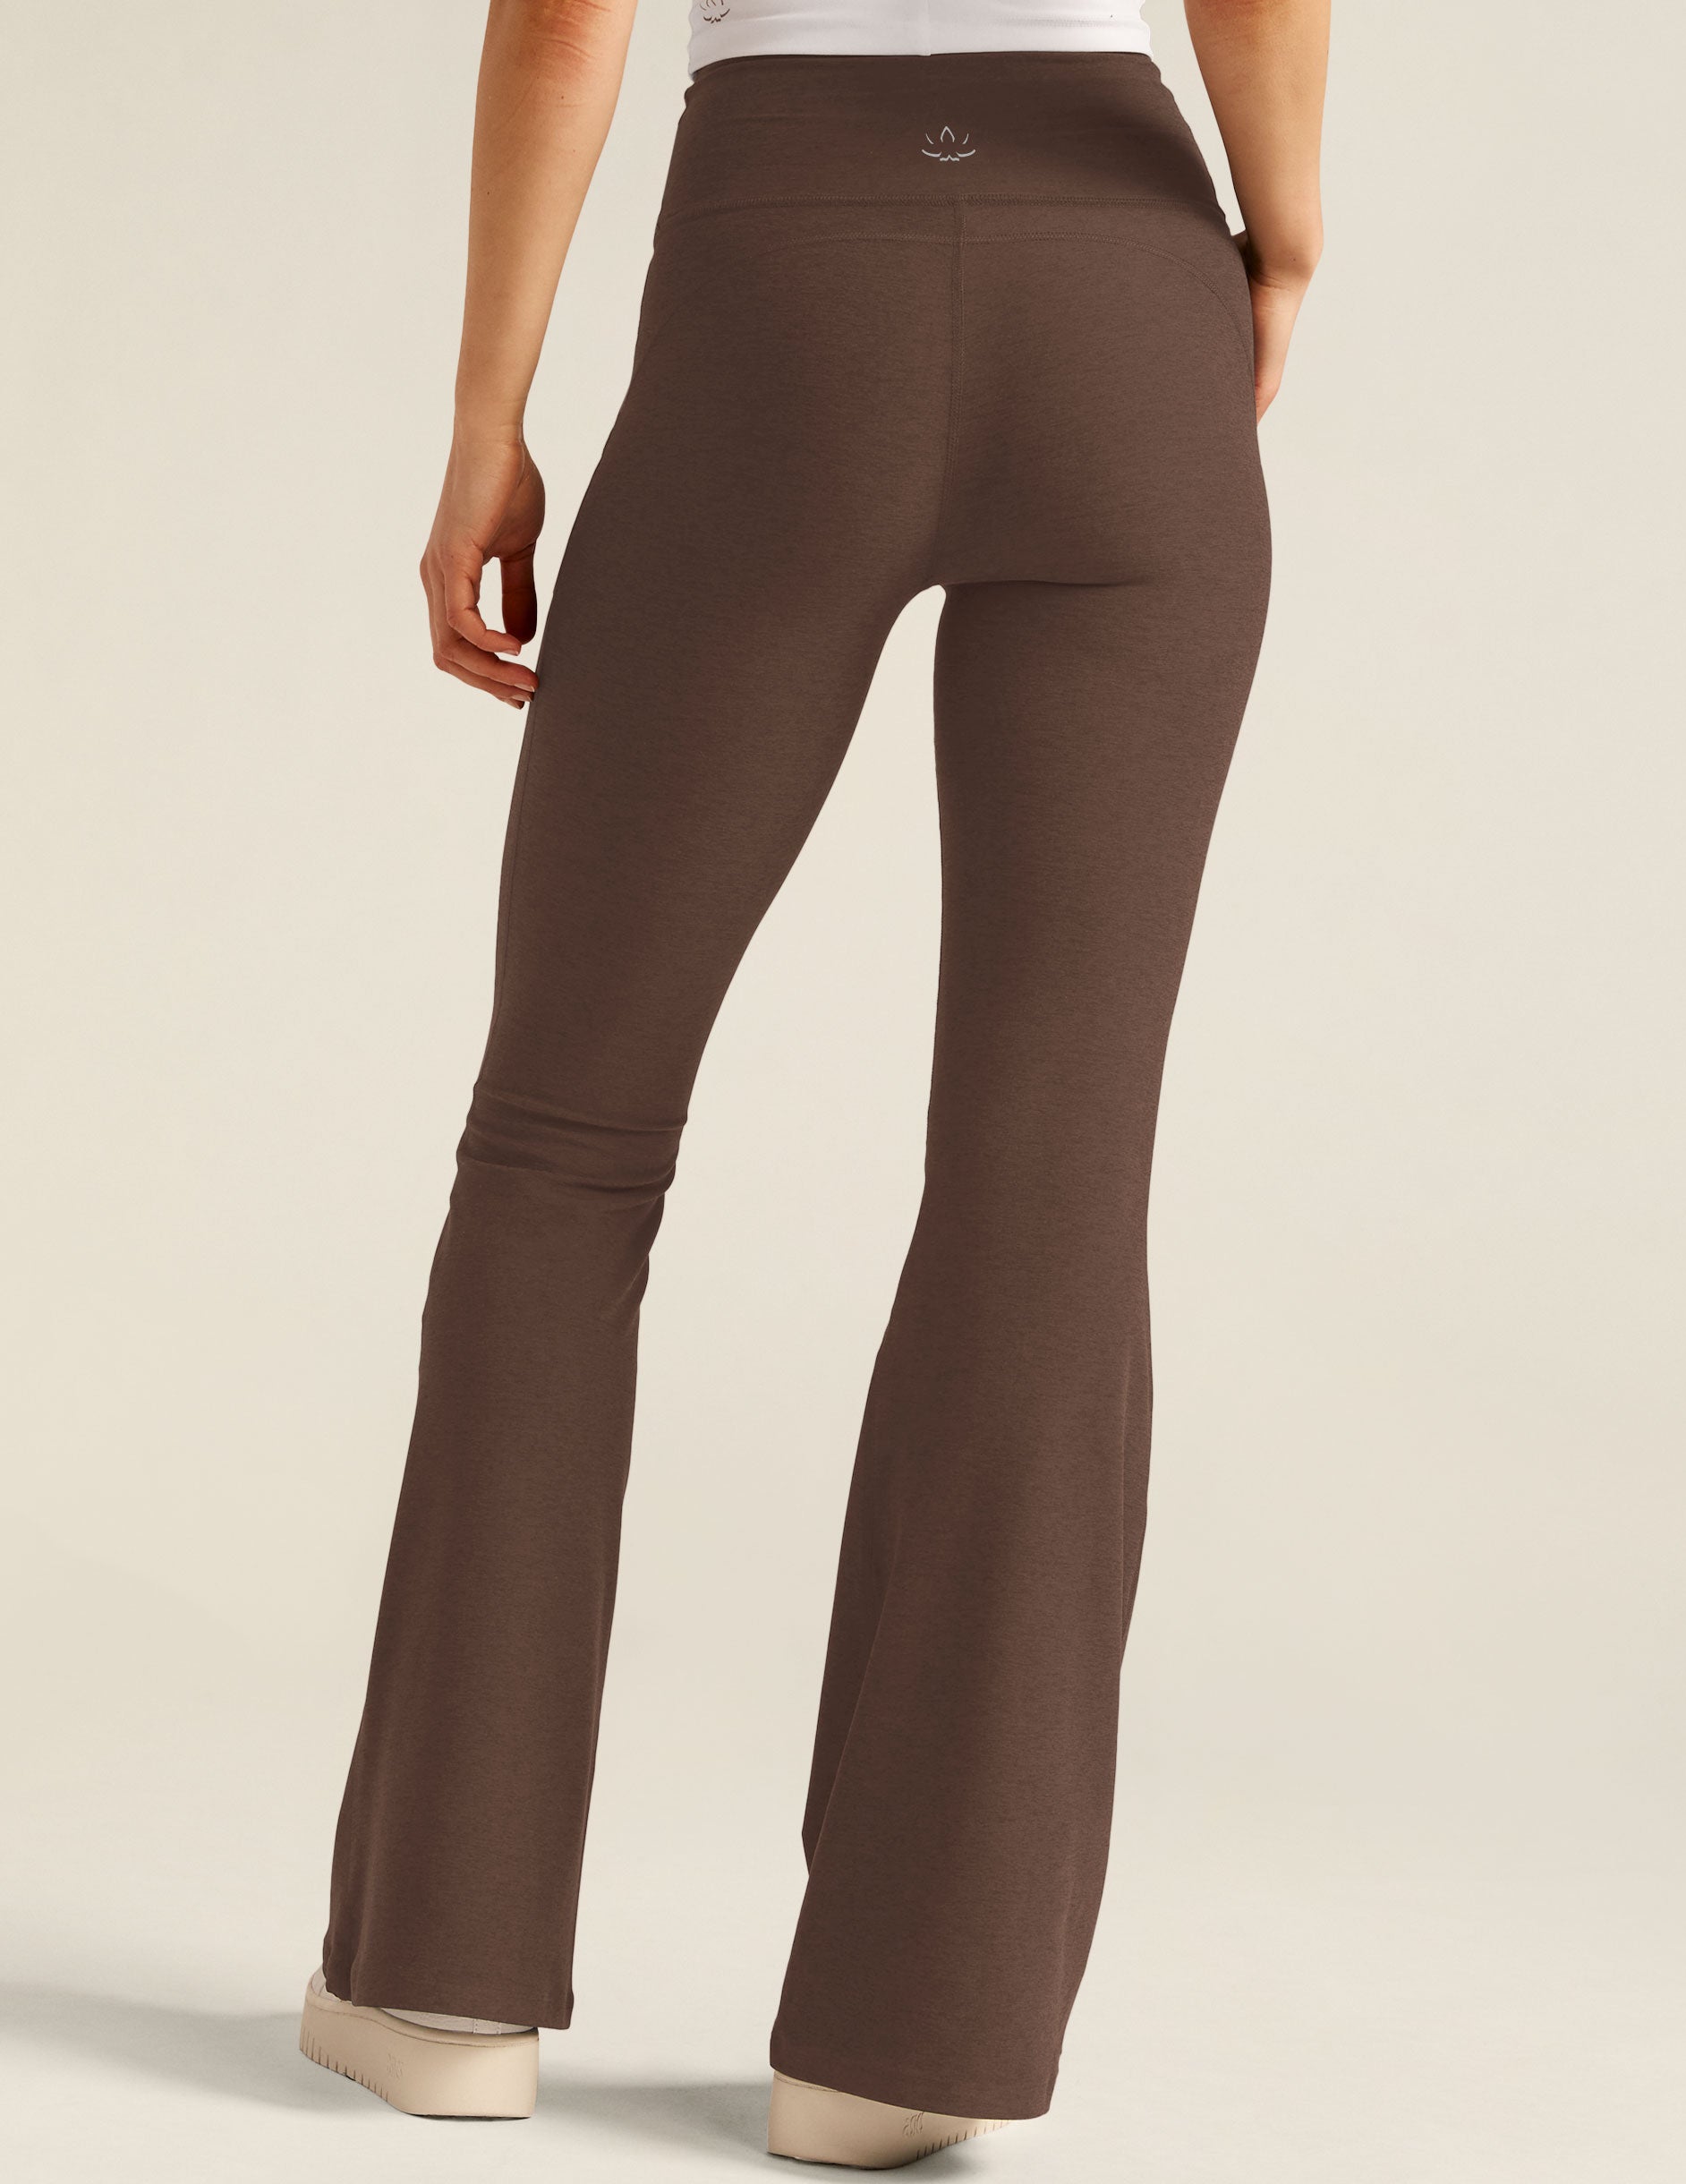 brown high-waisted flare pants with front side pockets. 